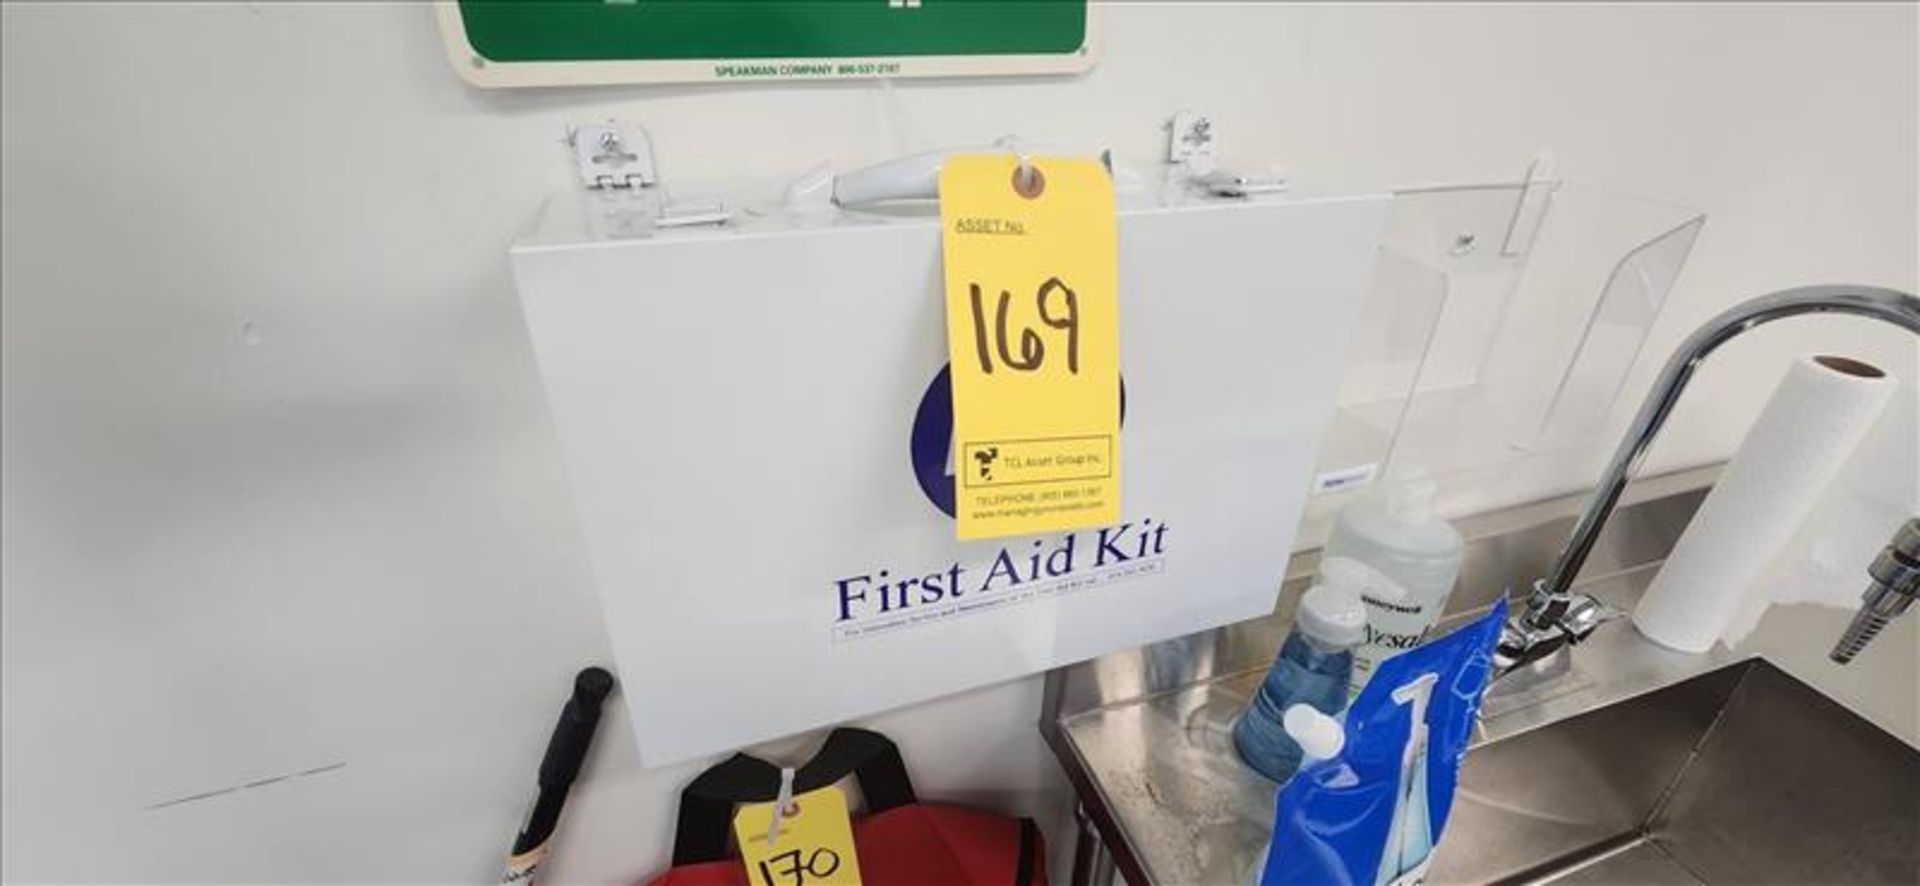 Kit Care First Aid Kit